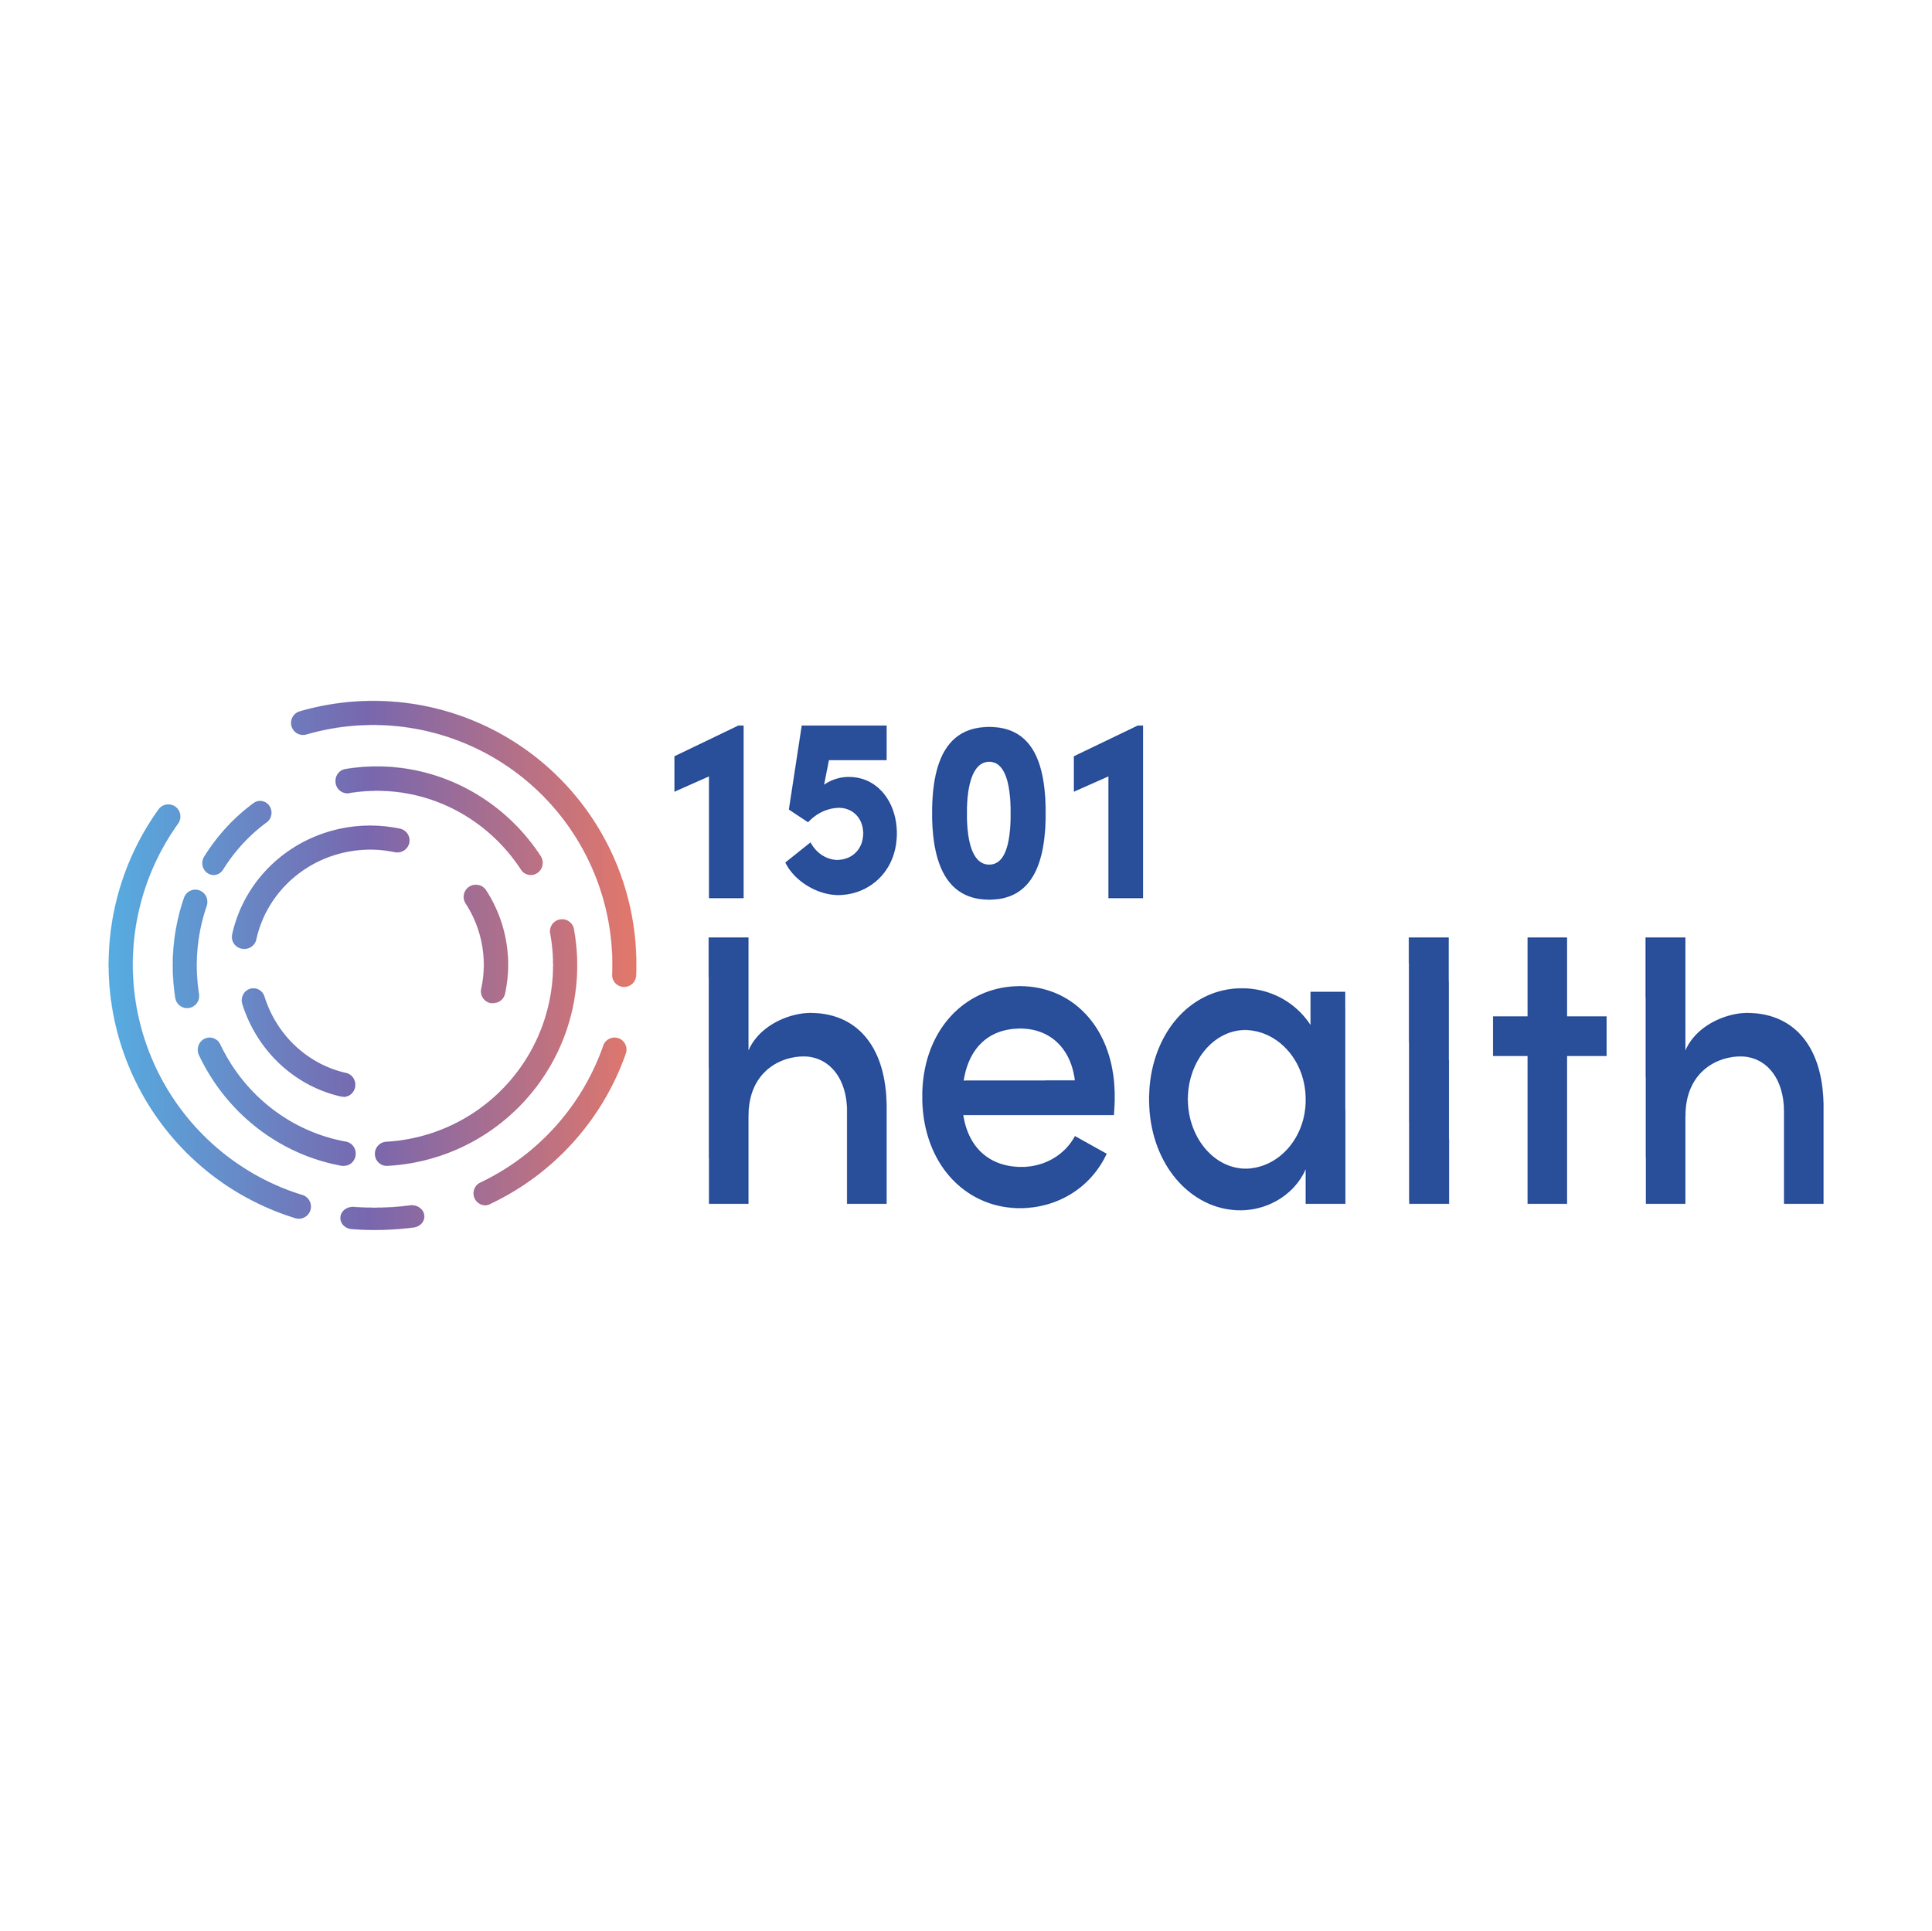 Mar 2022: Seven Healthcare Startups Selected for 1501 Health Incubator Second Cohort